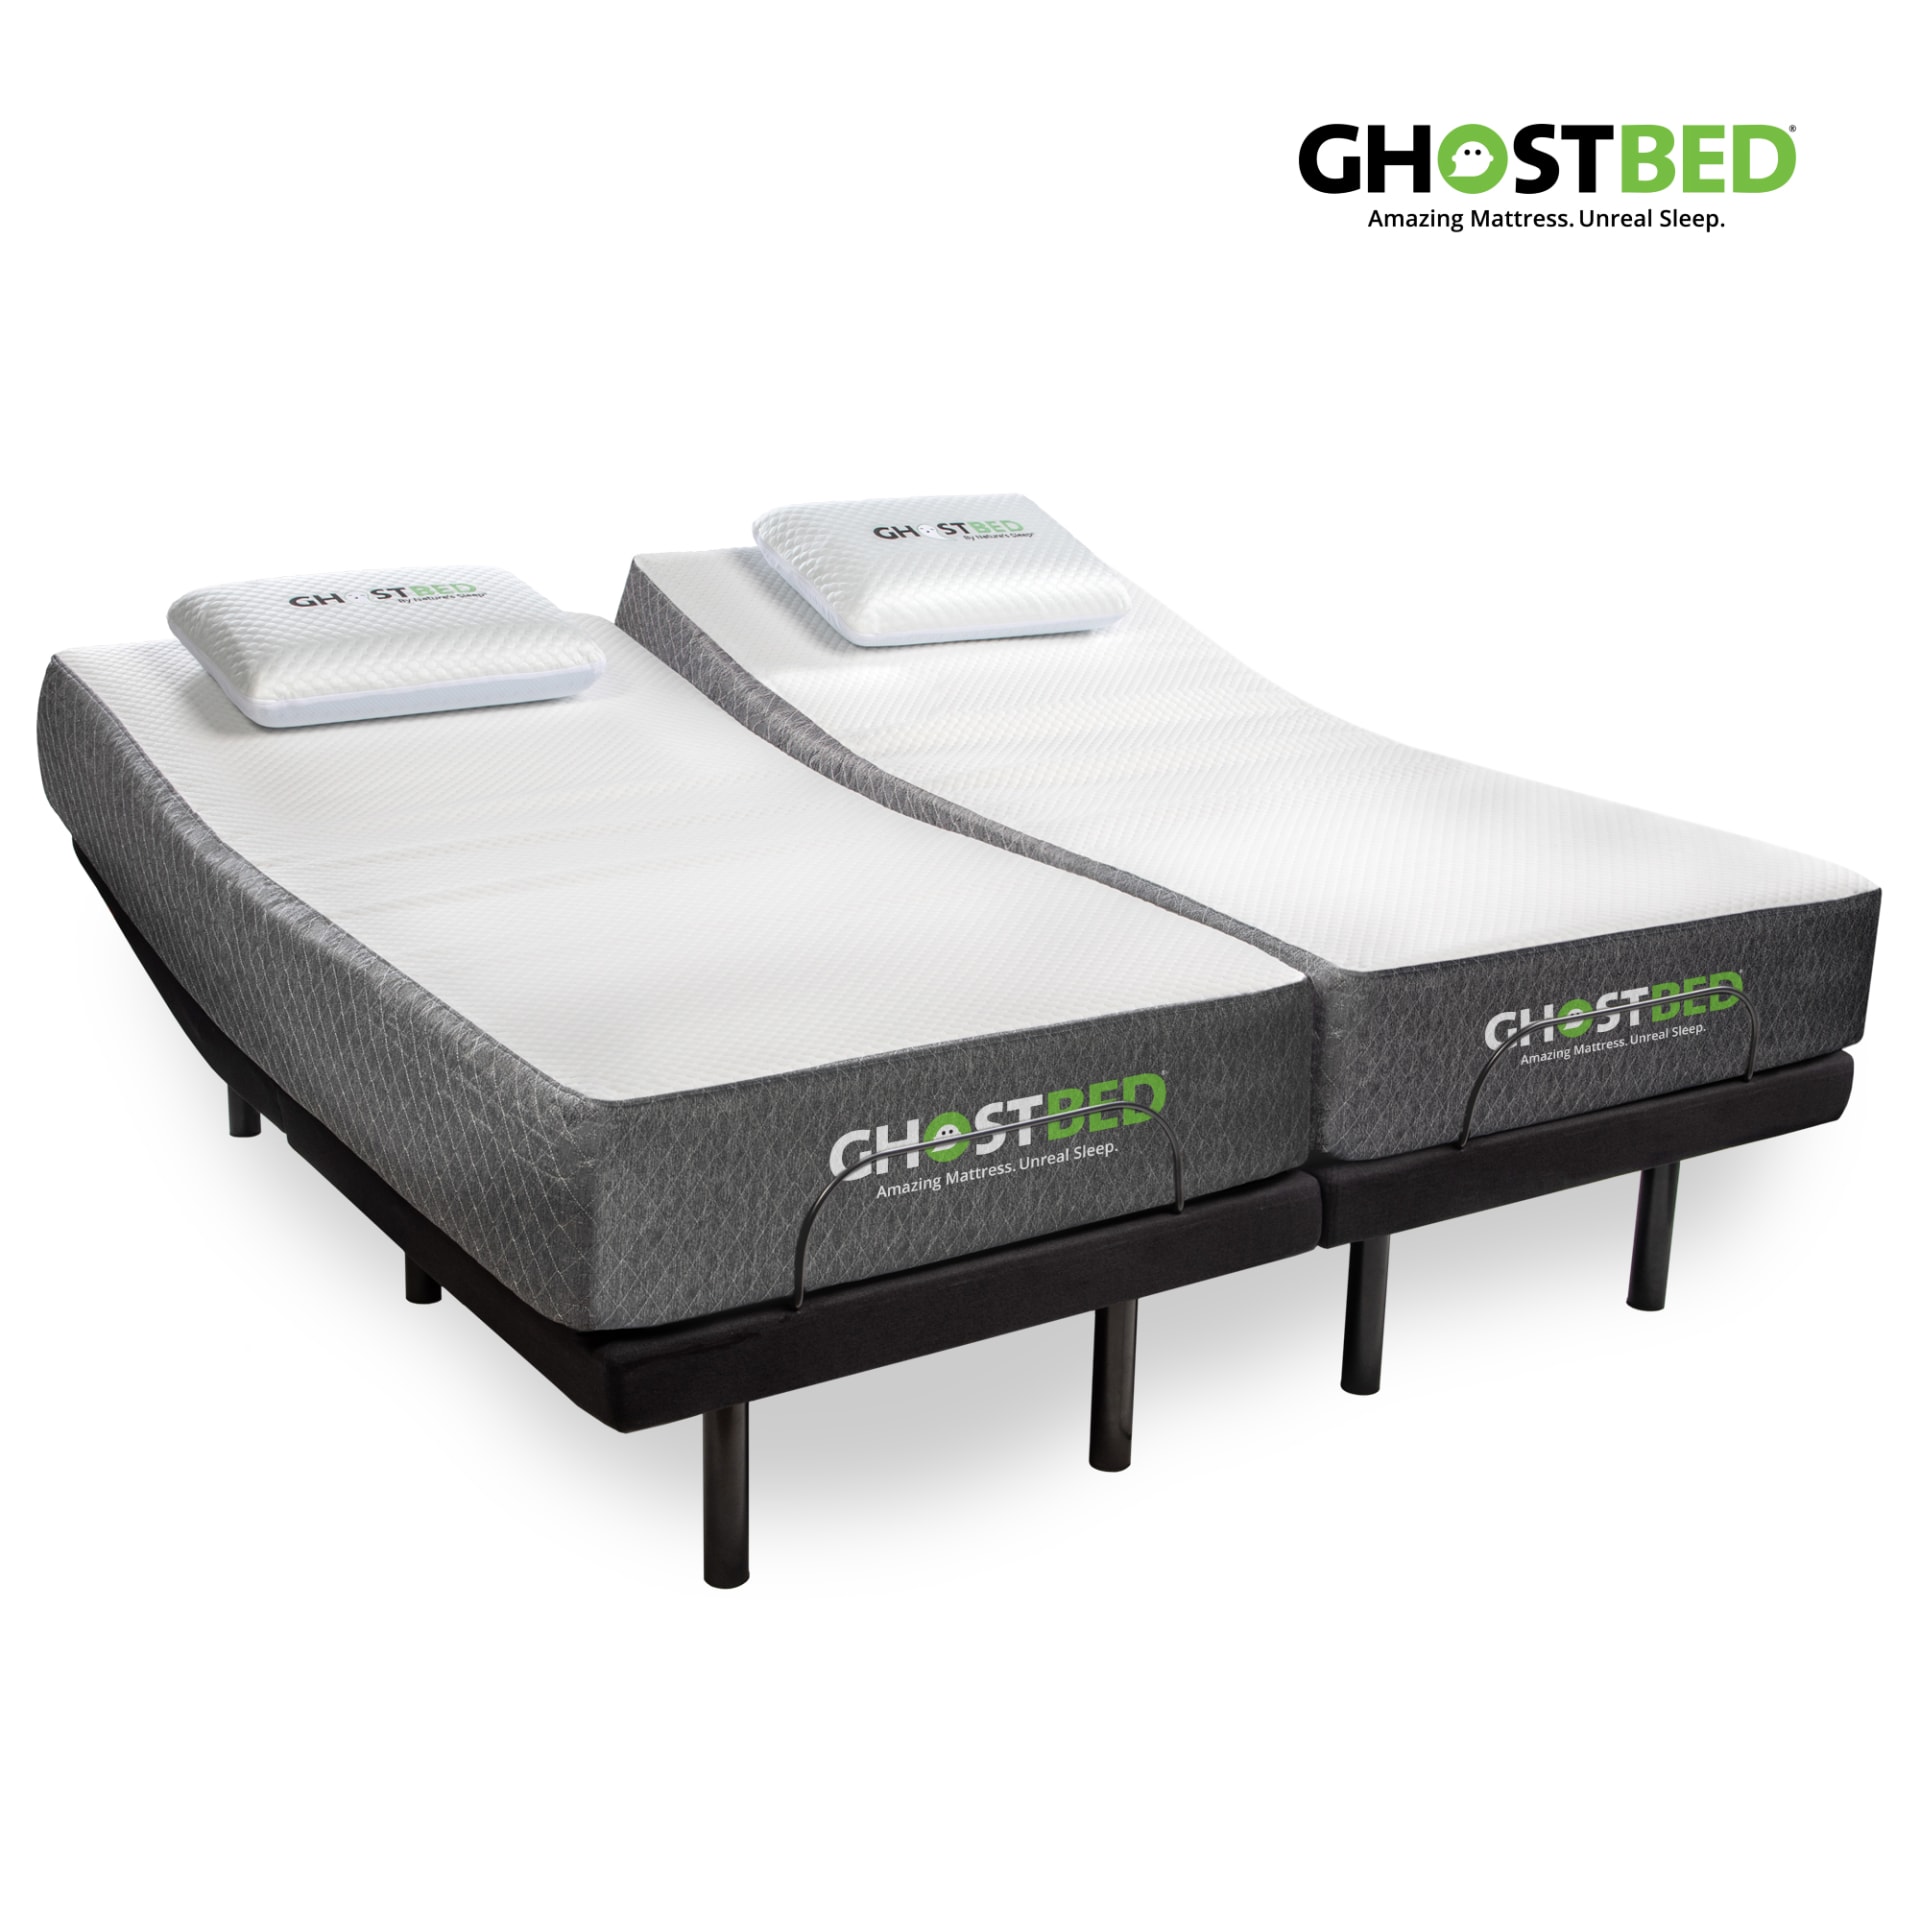 Ghostbed 11 Memory Foam Mattress With, King Size Bed Split Adjustable Base